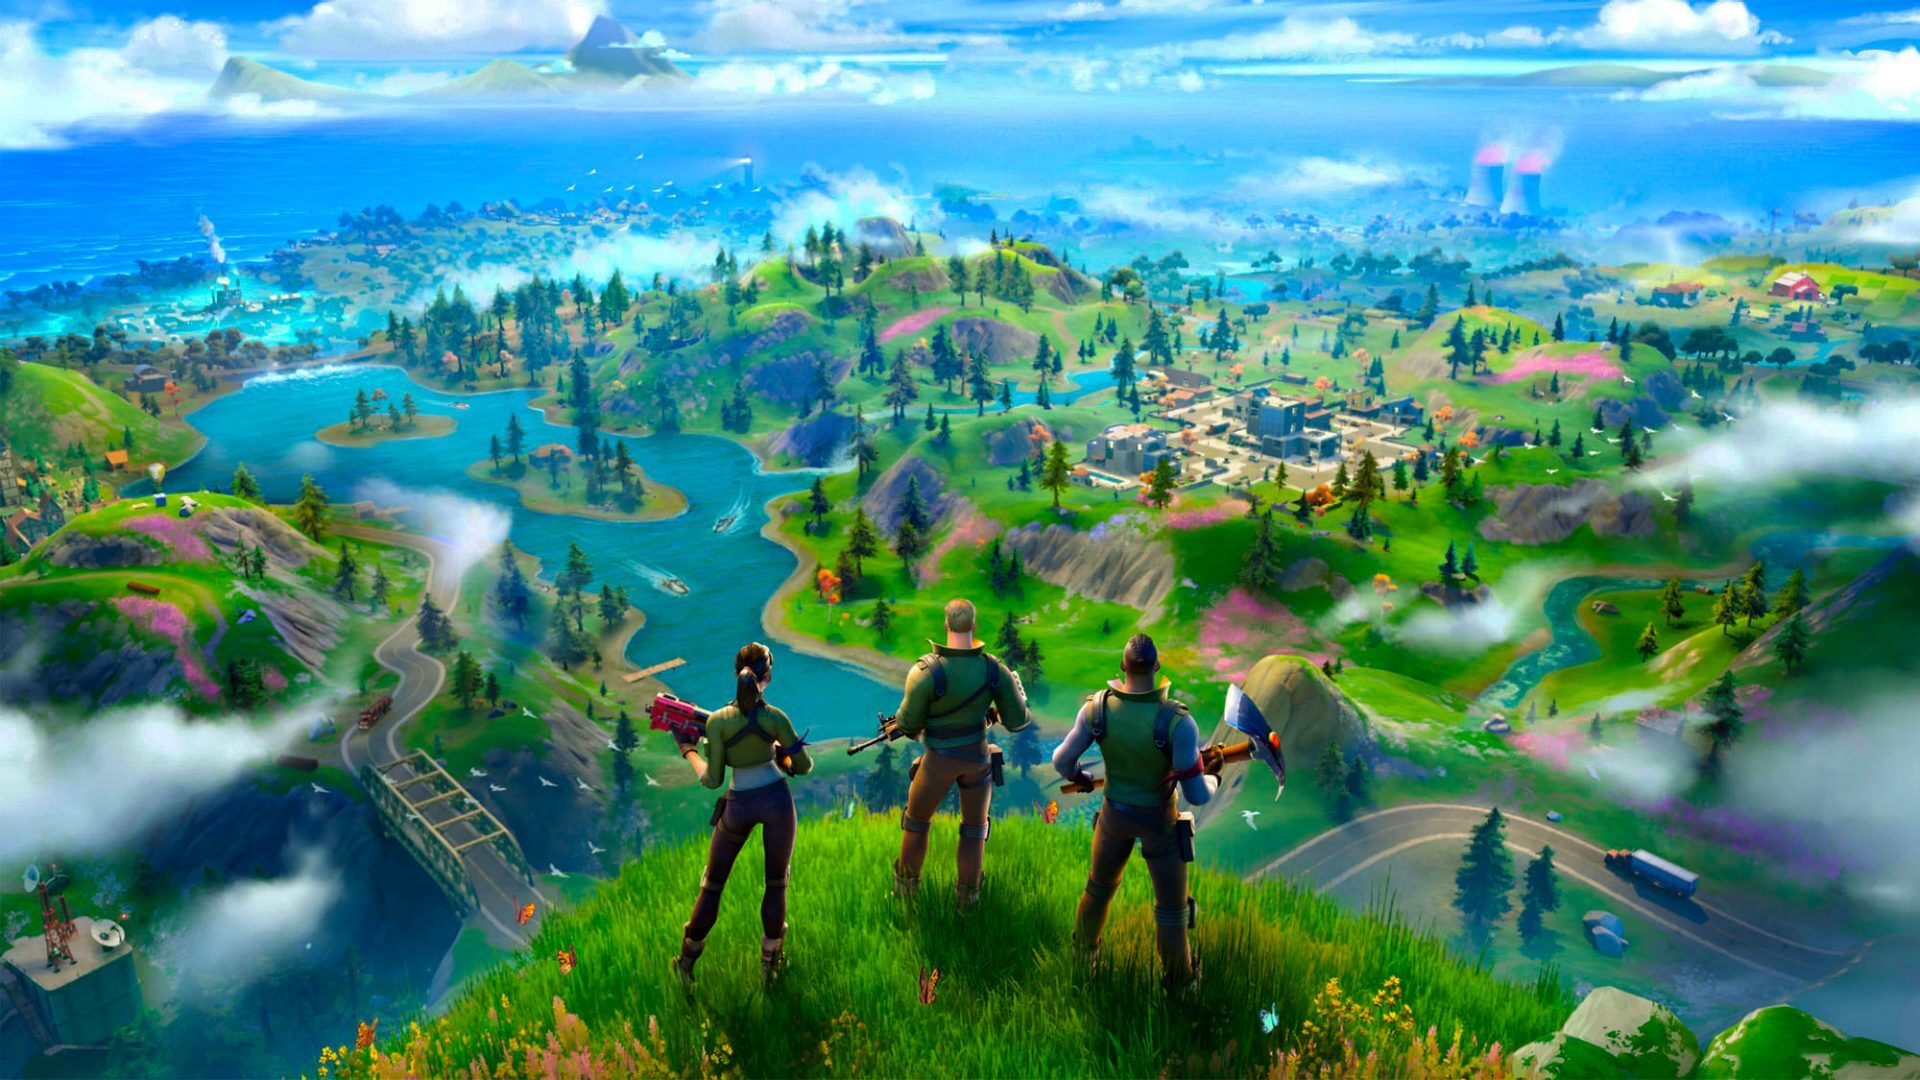 EPIC GAMES *CEO* in Fortnite!? 